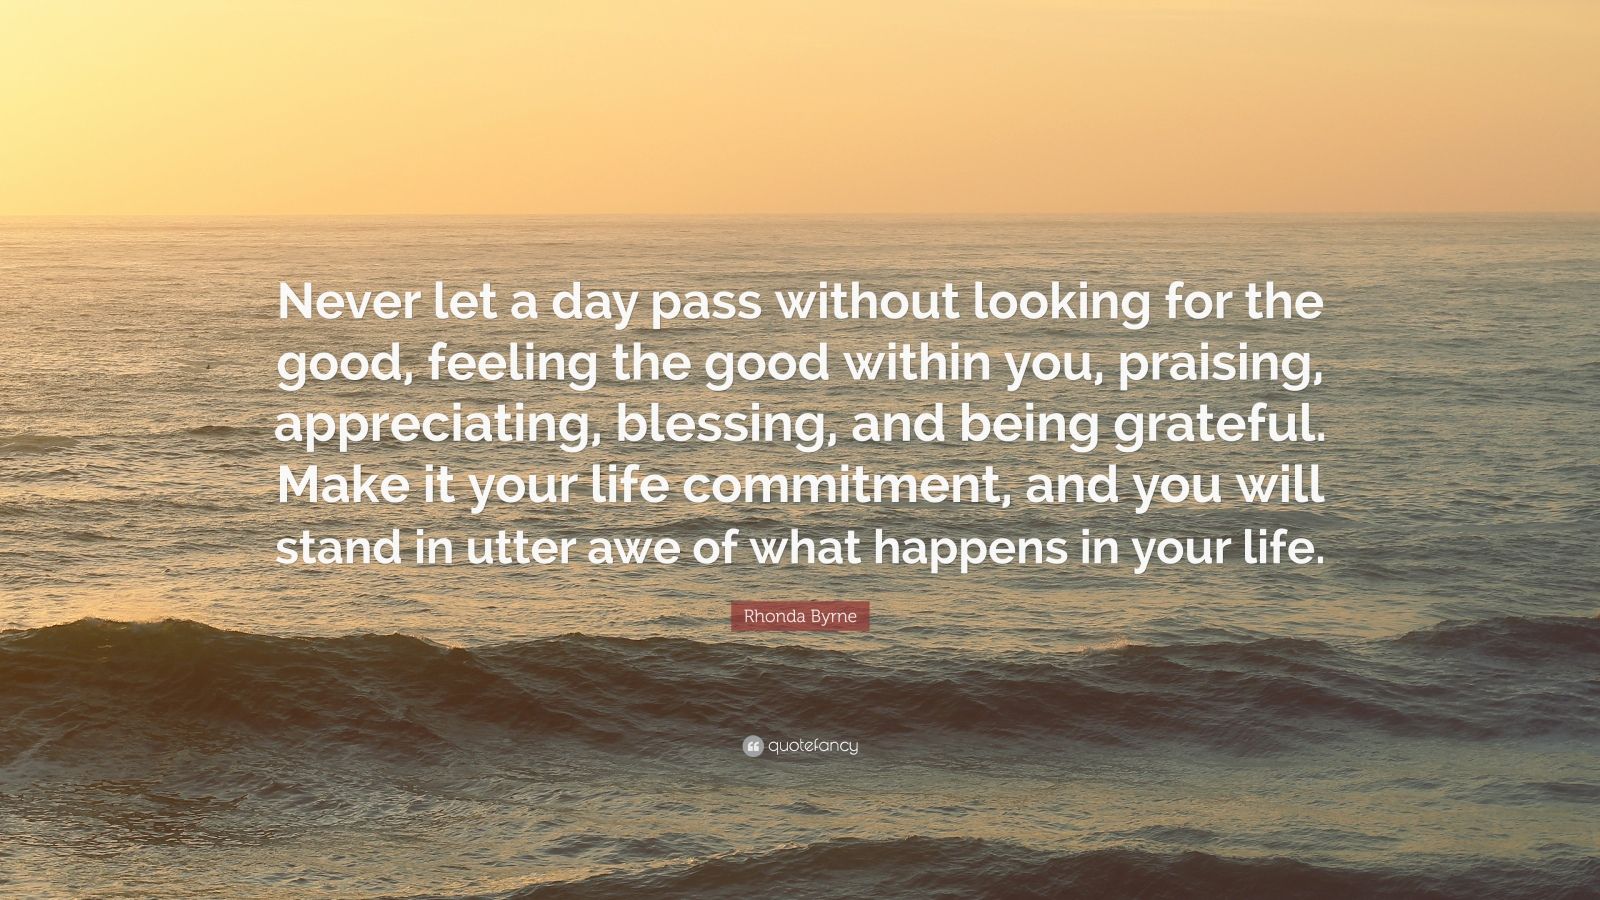 Rhonda Byrne Quote: “Never let a day pass without looking for the good ...